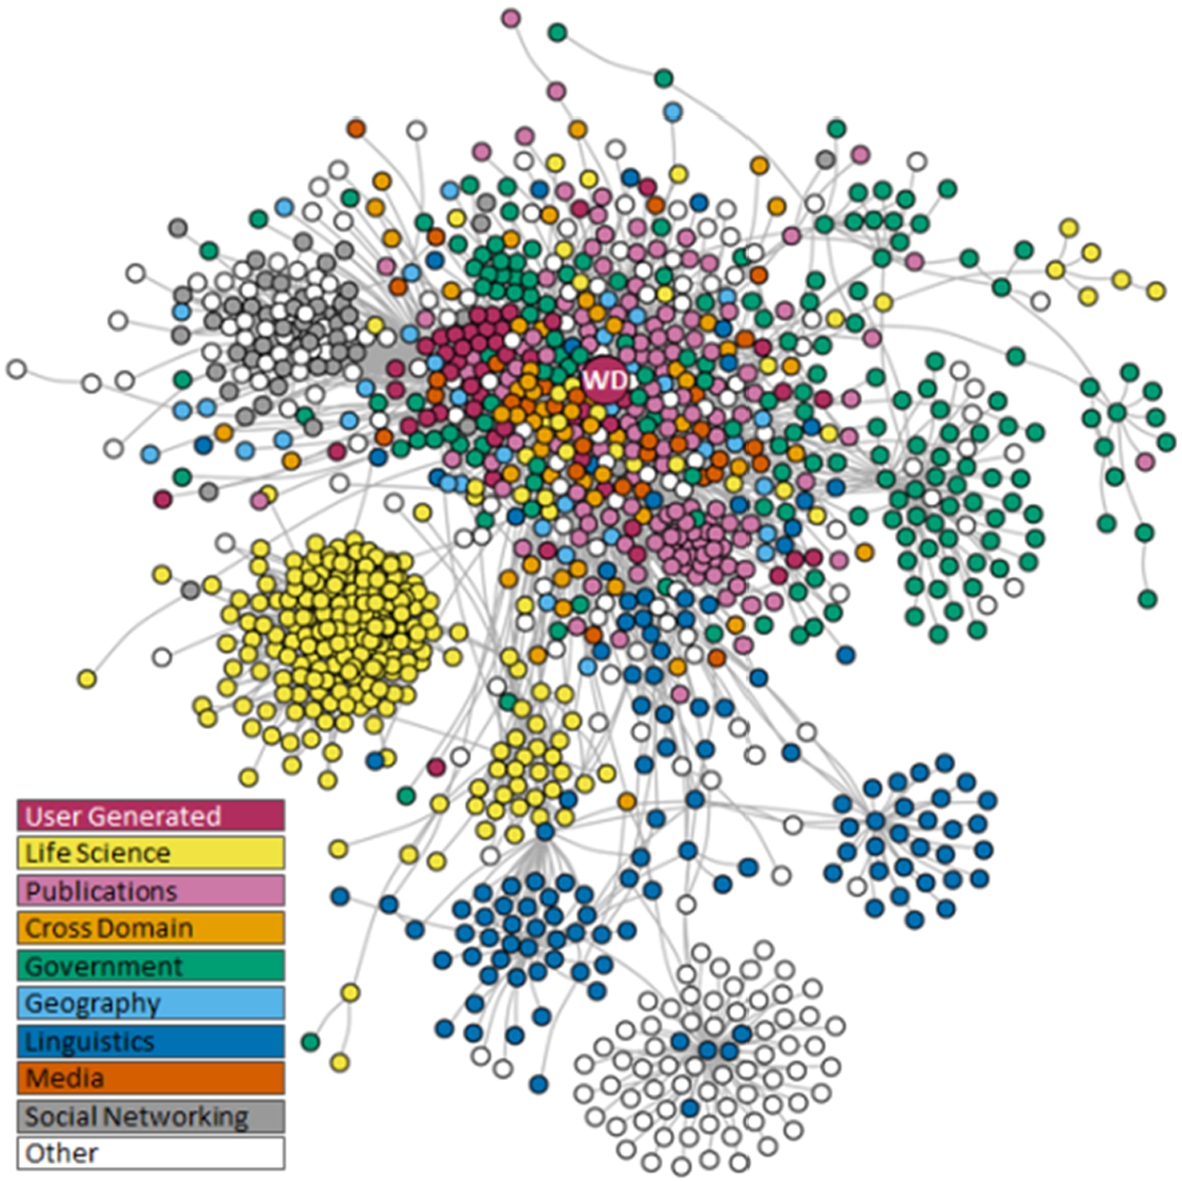 Representing COVID-19 information in collaborative knowledge graphs: The  case of Wikidata - IOS Press